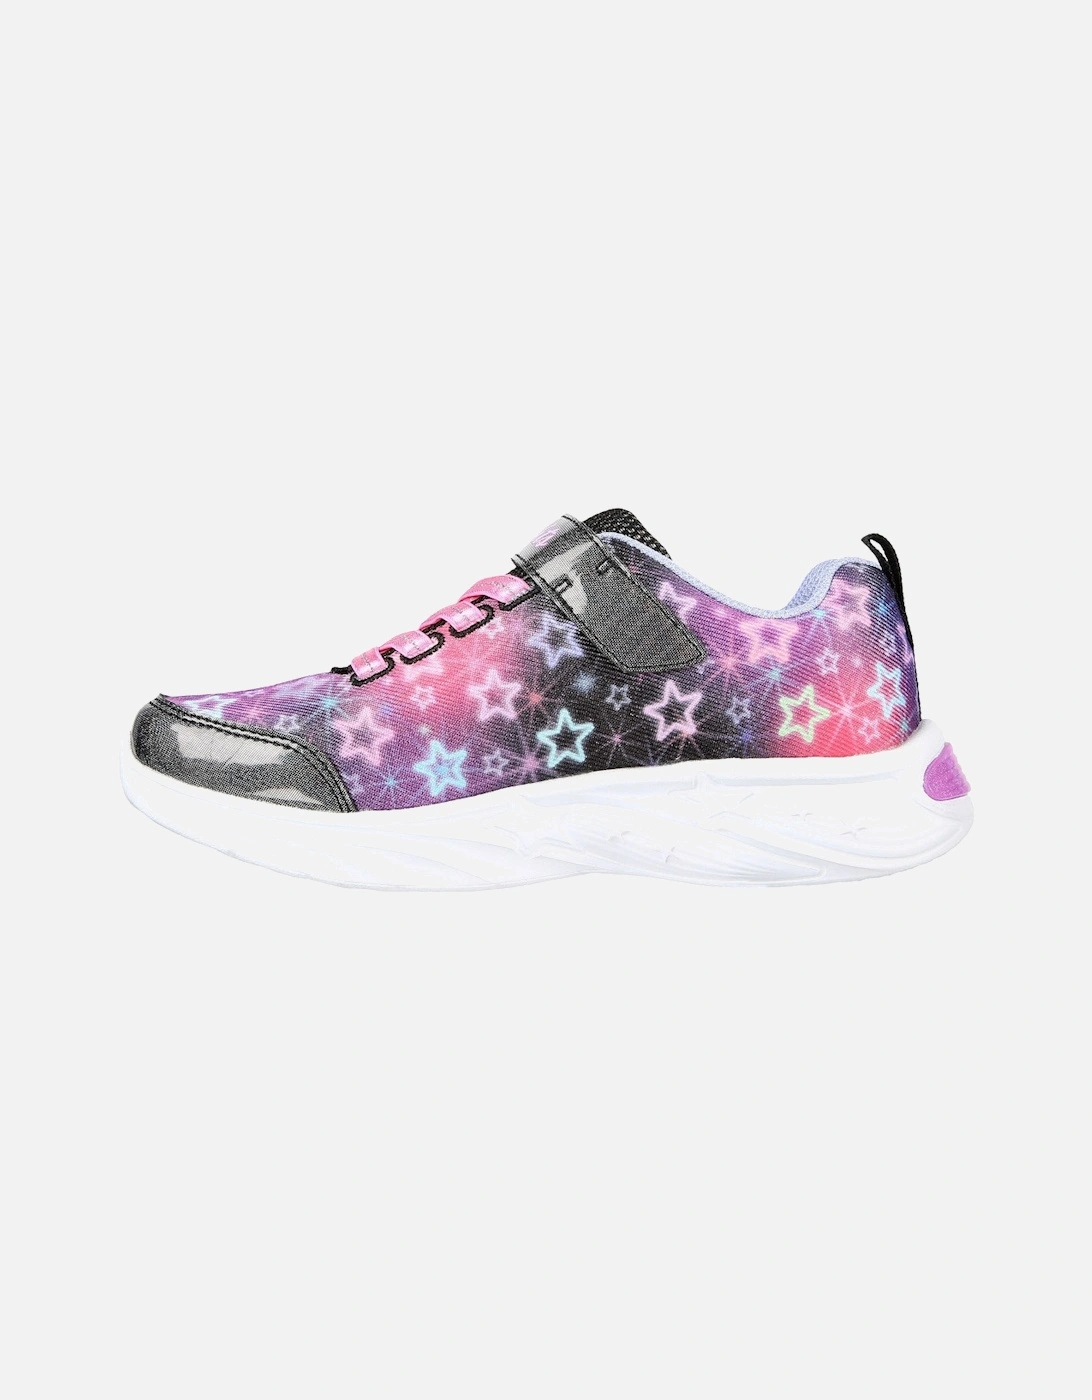 Girls Star Sparks Light Up Sporty Trainers